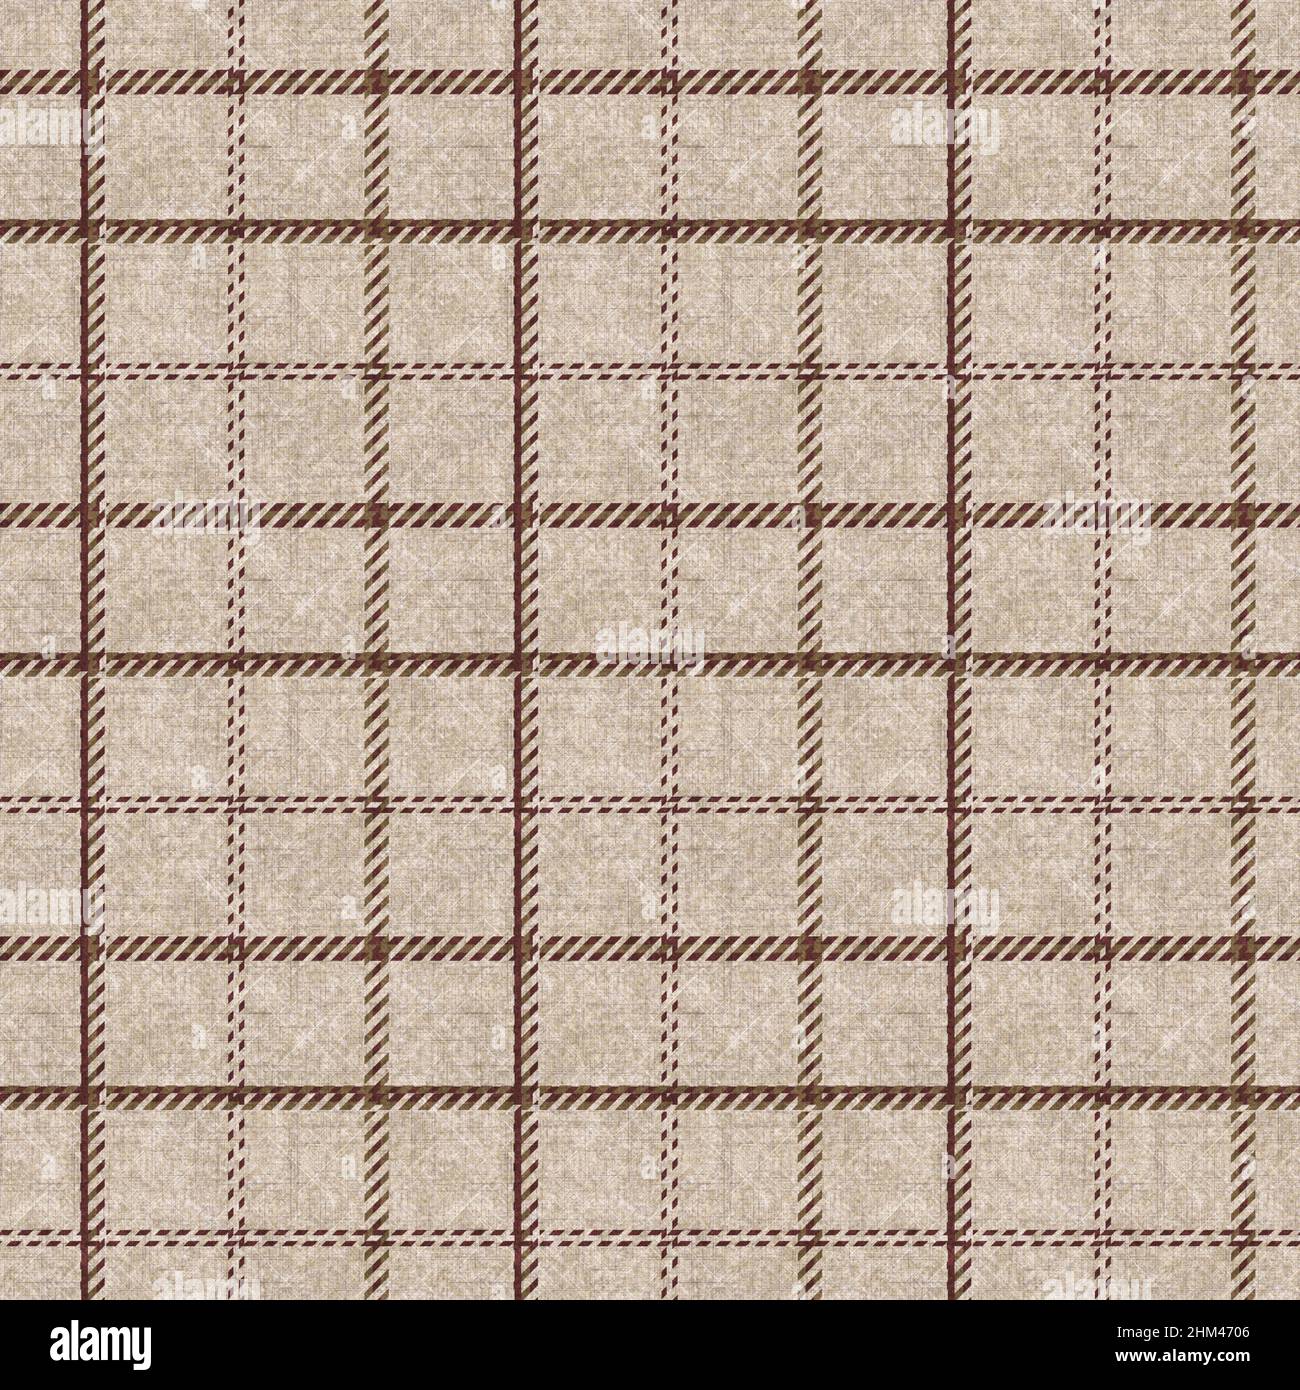 Square brown beige seamless fabric texture pattern